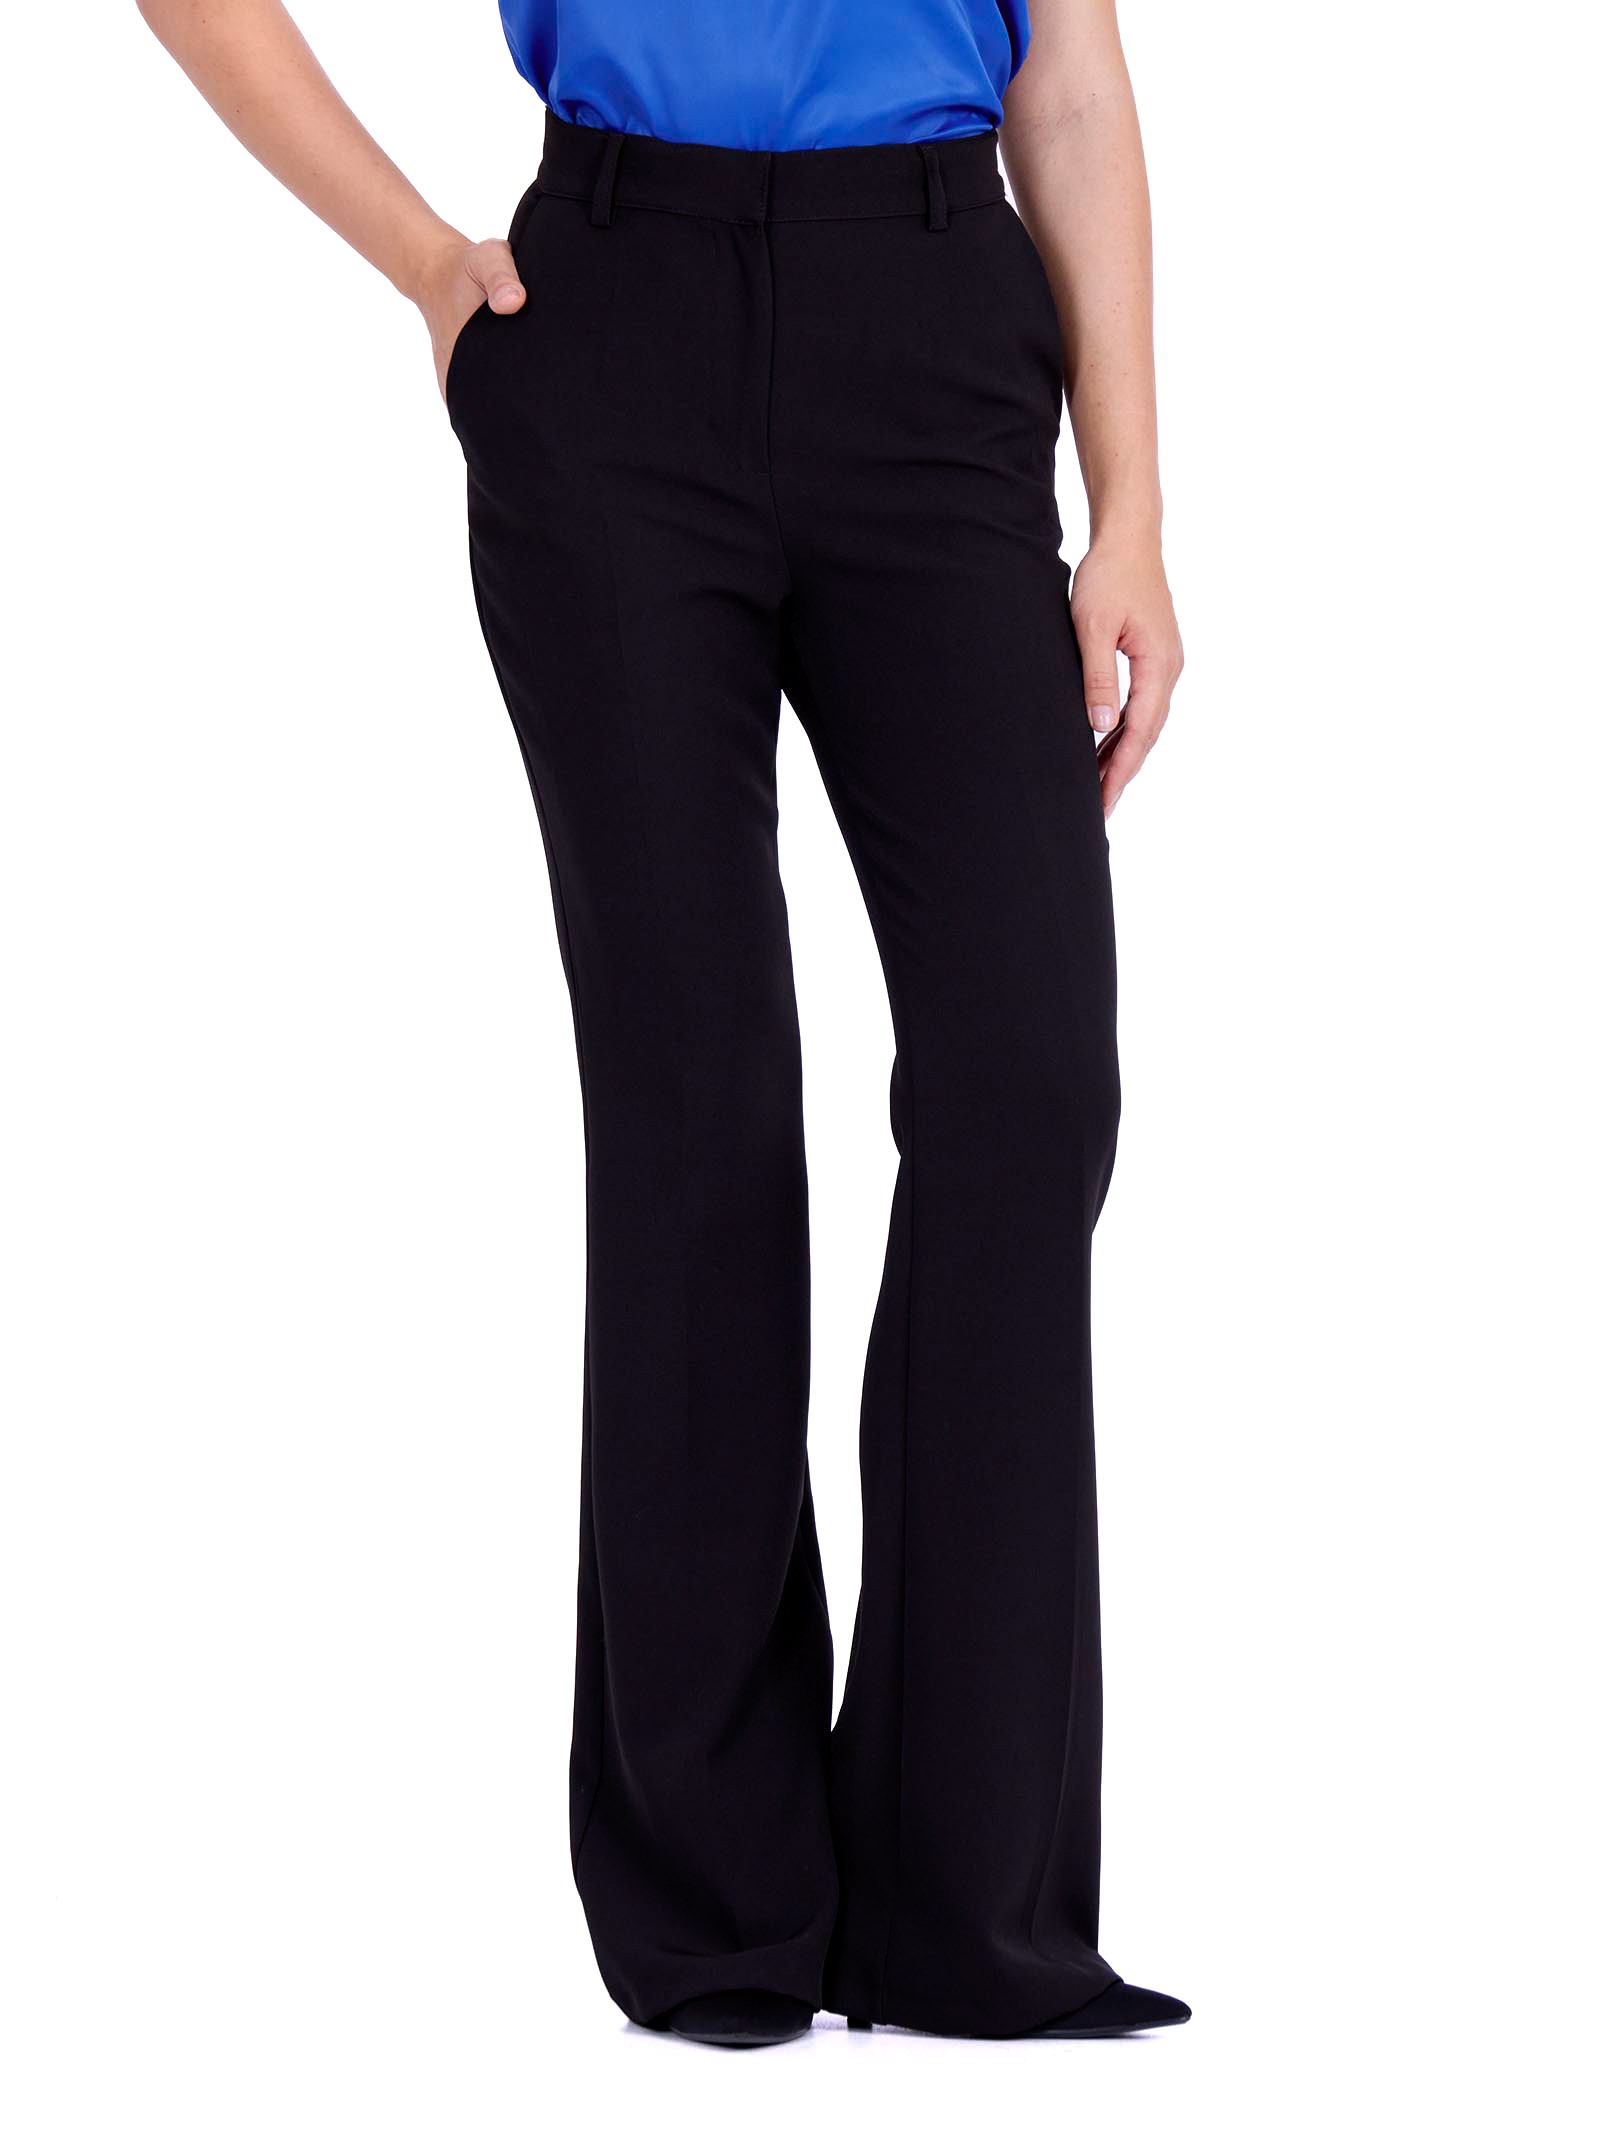 The bell bottoms Black pants